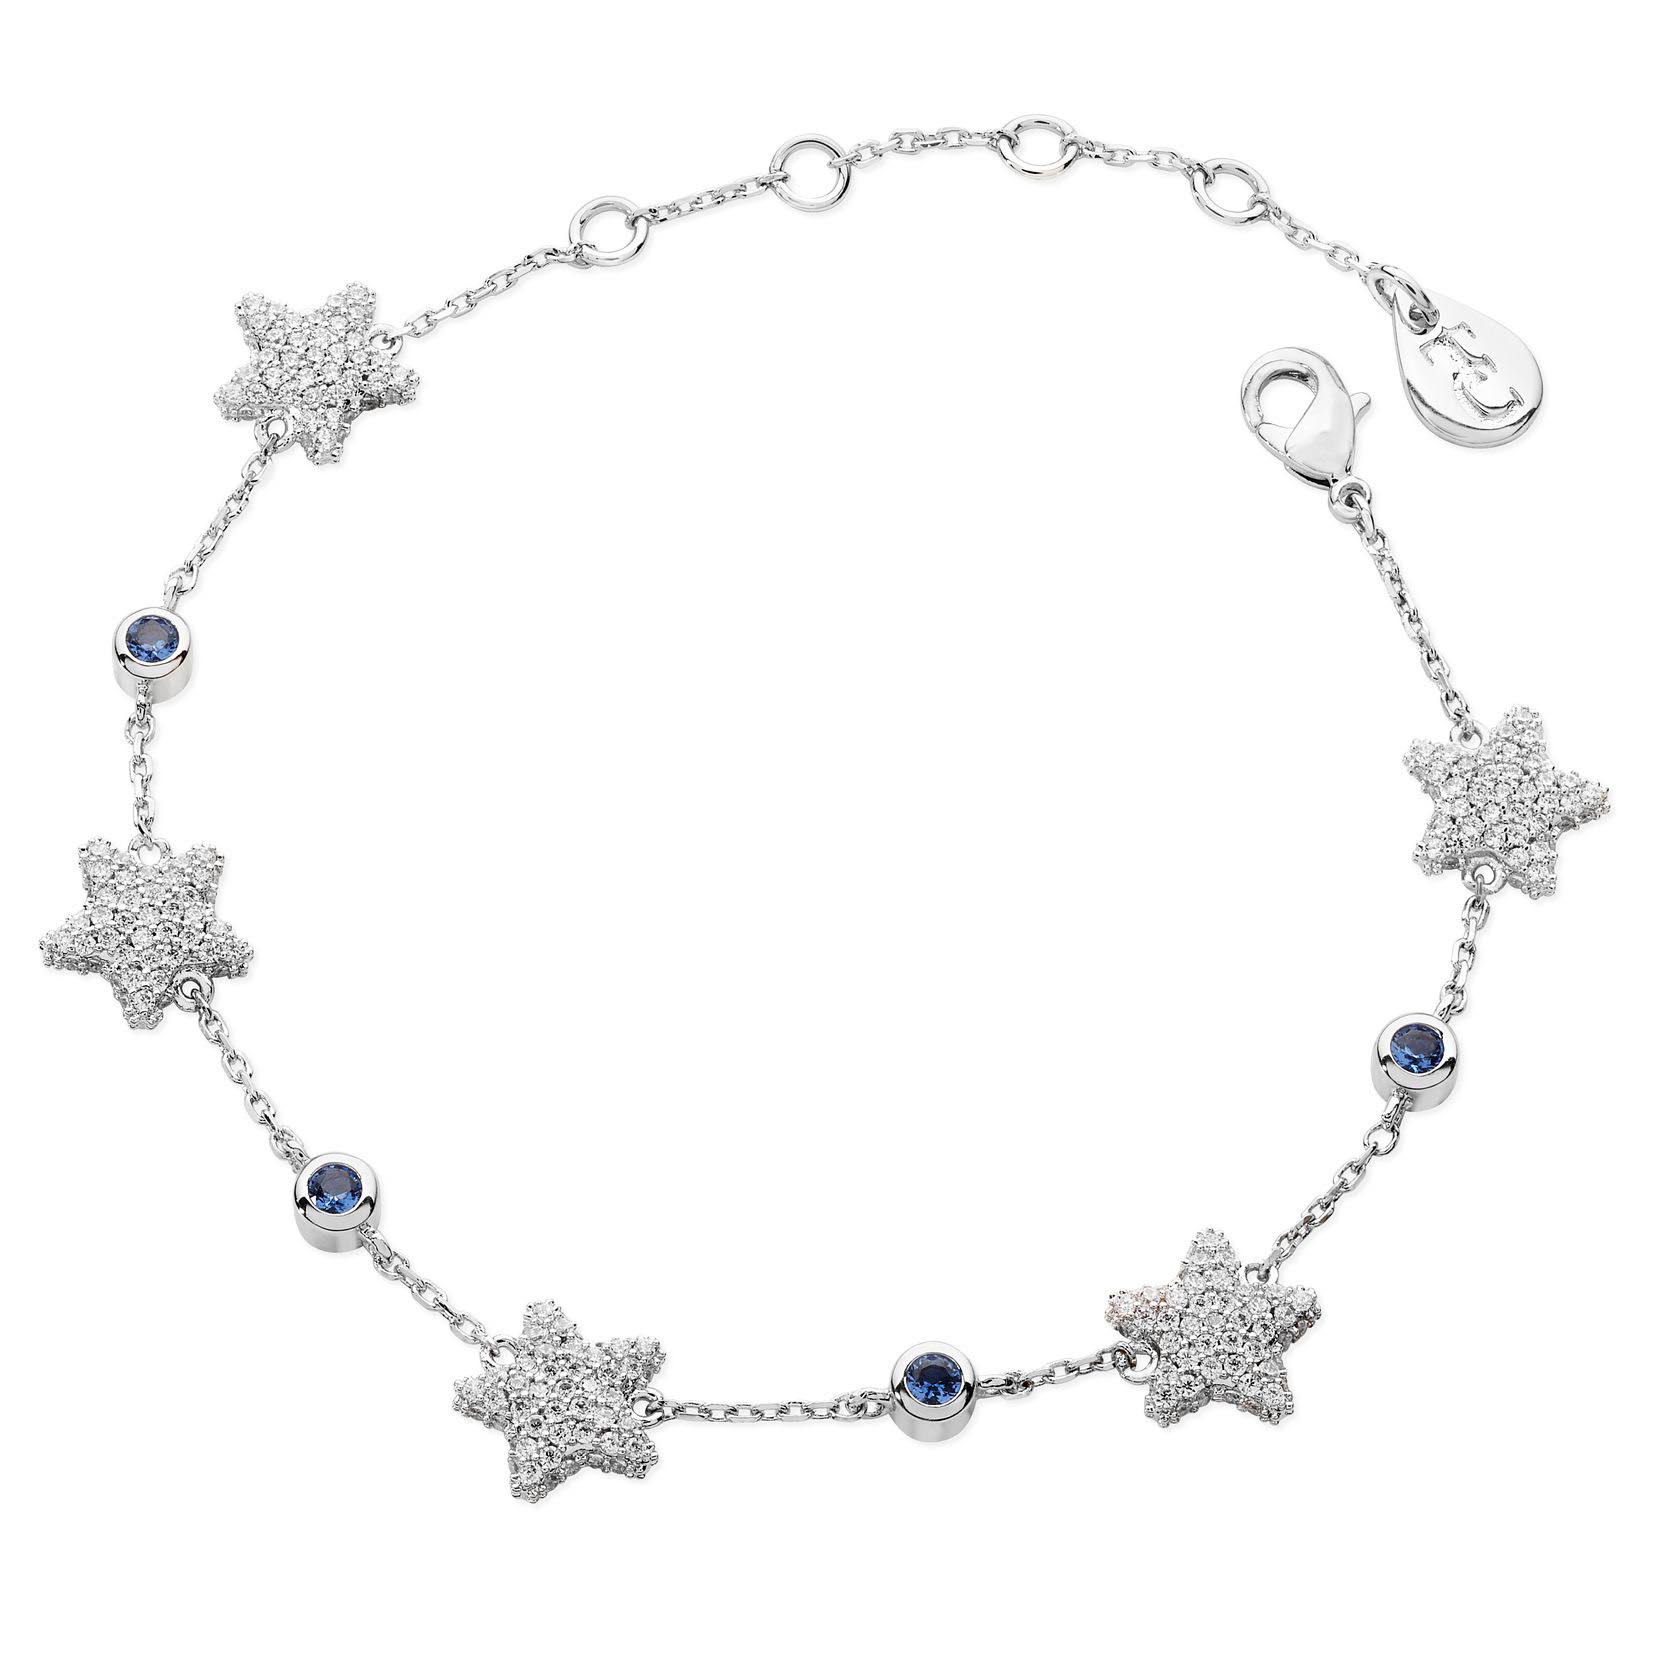 Tipperary Crystal Silver Plated Star Bracelet With Blue Cubic Zirconia